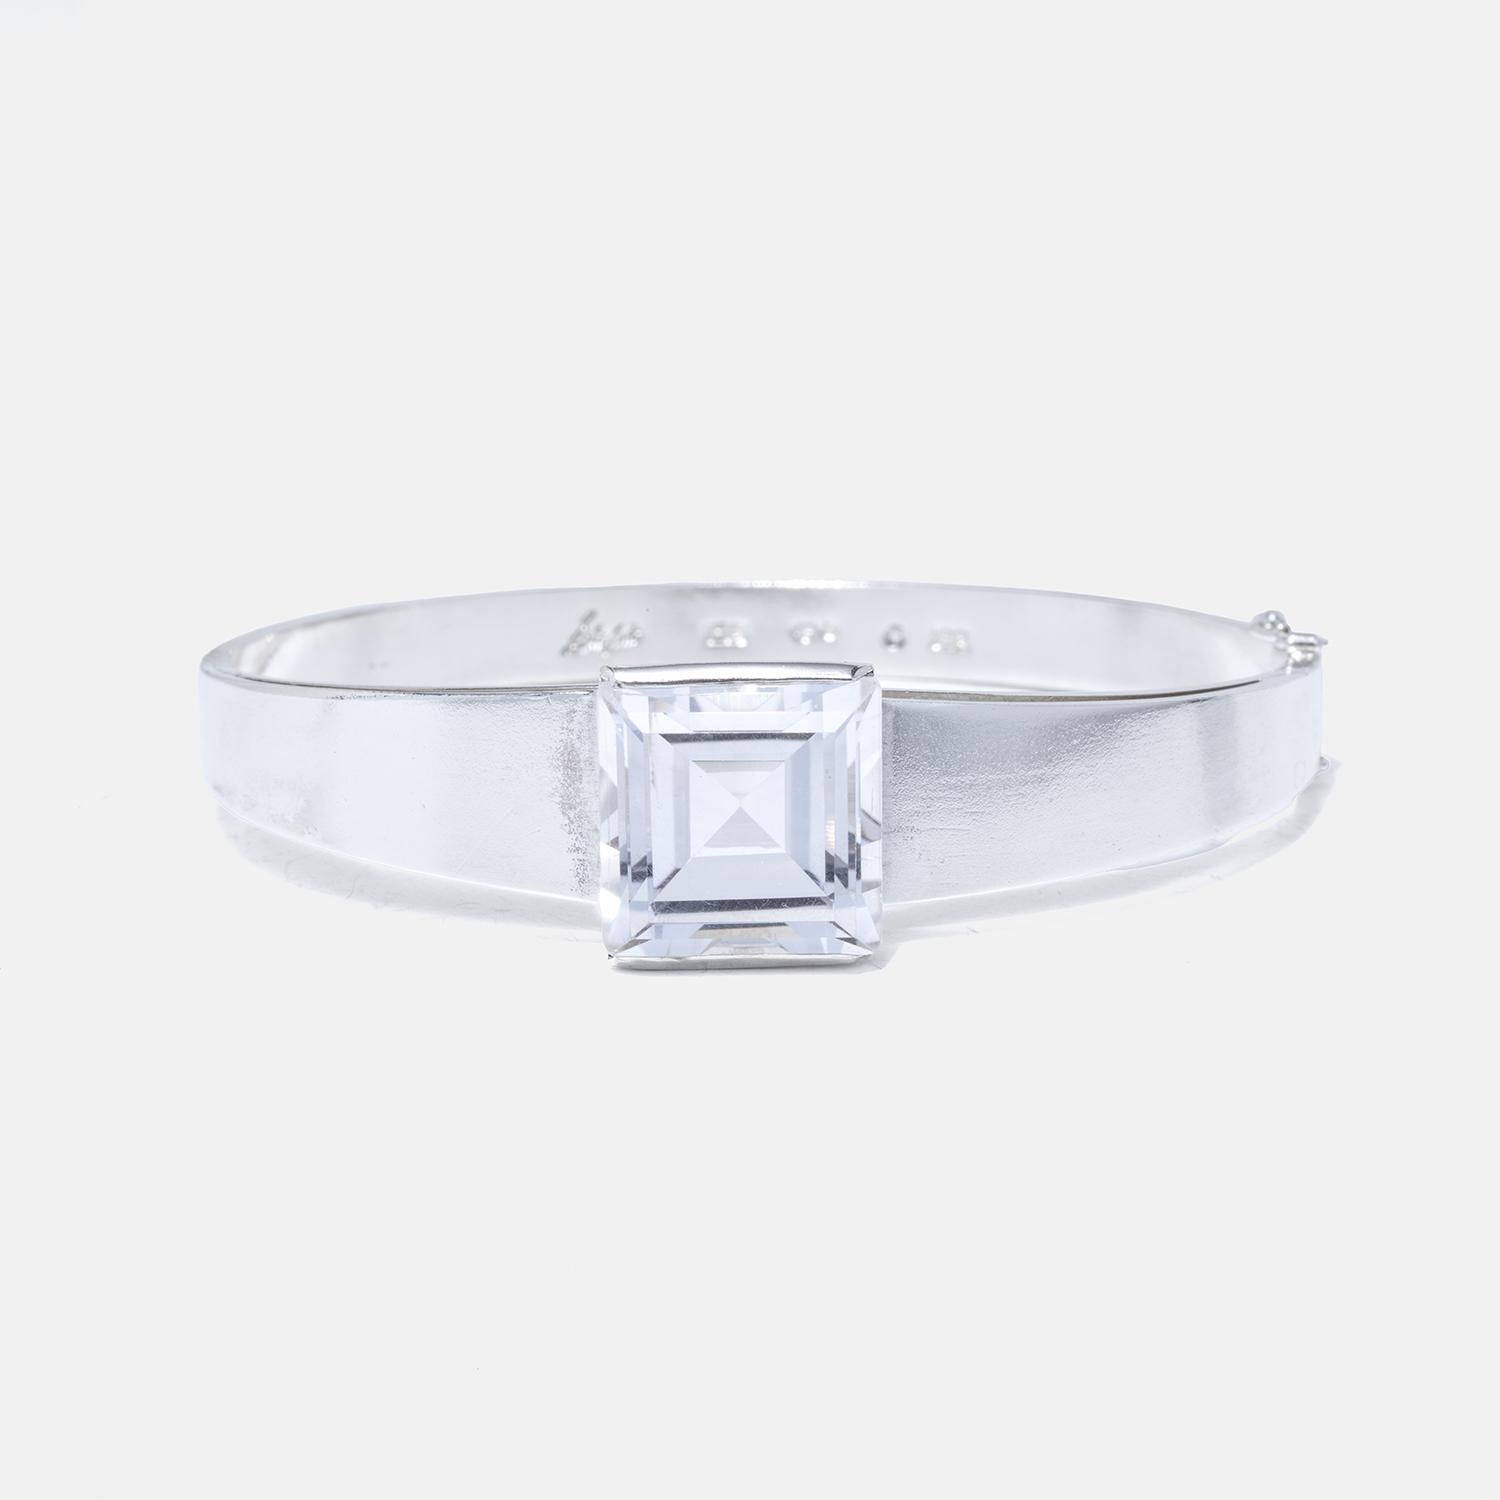 This silver bracelet features a classic design that seamlessly integrates with the inherent beauty of the faceted, square rock crystal centerpiece.

Elevate your collection with a piece that transcends trends, telling a story of craftsmanship,